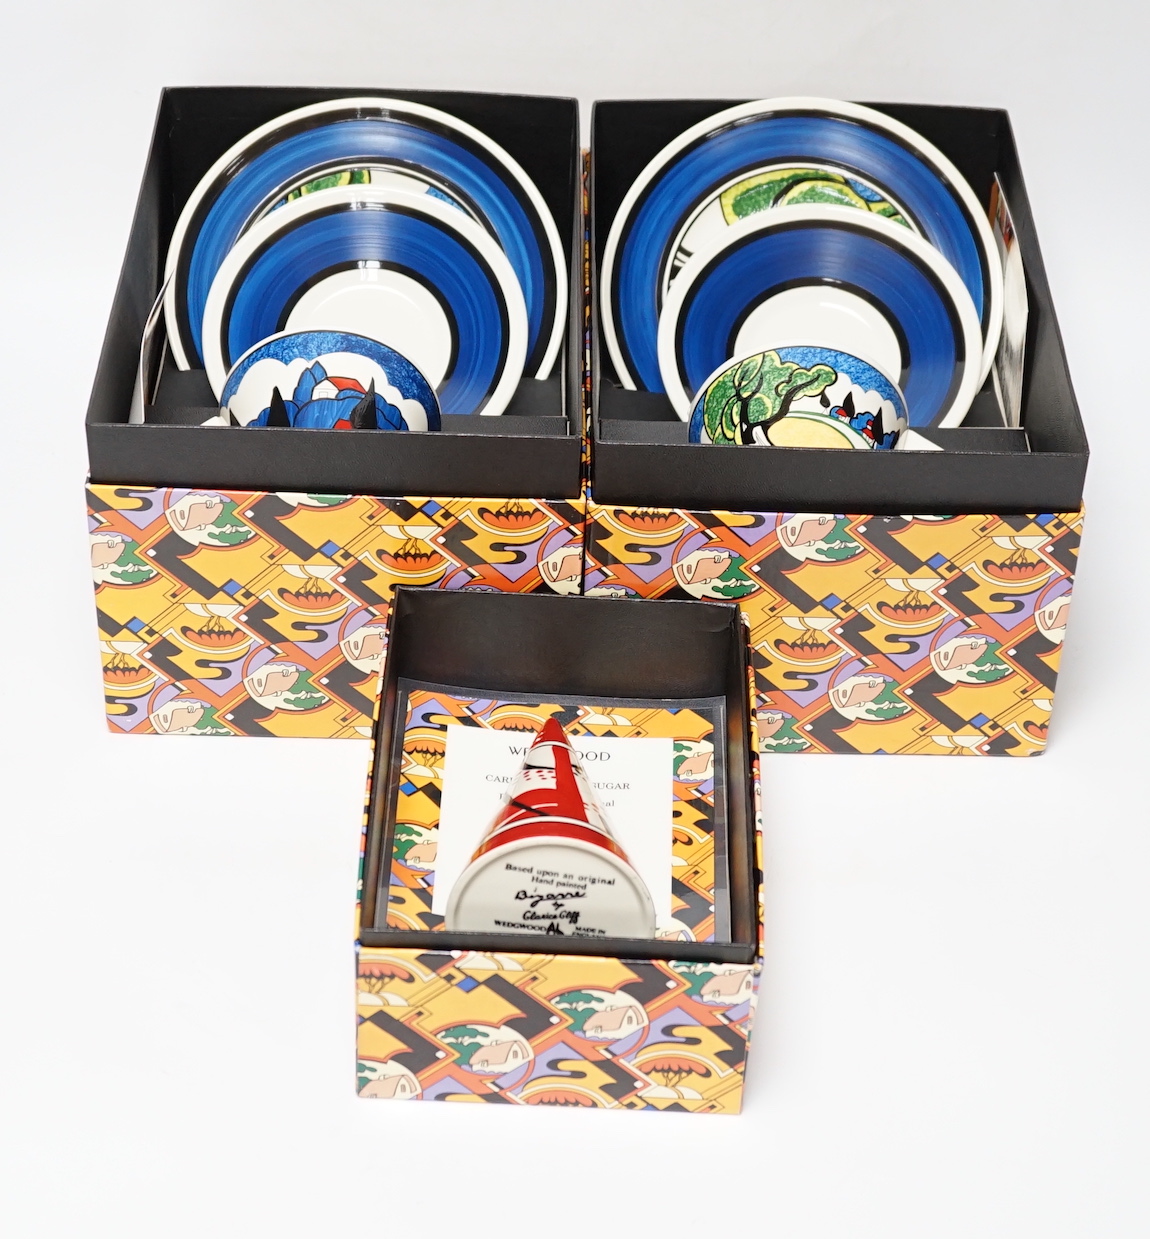 Two Wedgwood Clarice Cliff limited edition May Avenue trios together with a carpet conical sugar, each with boxes and certificates